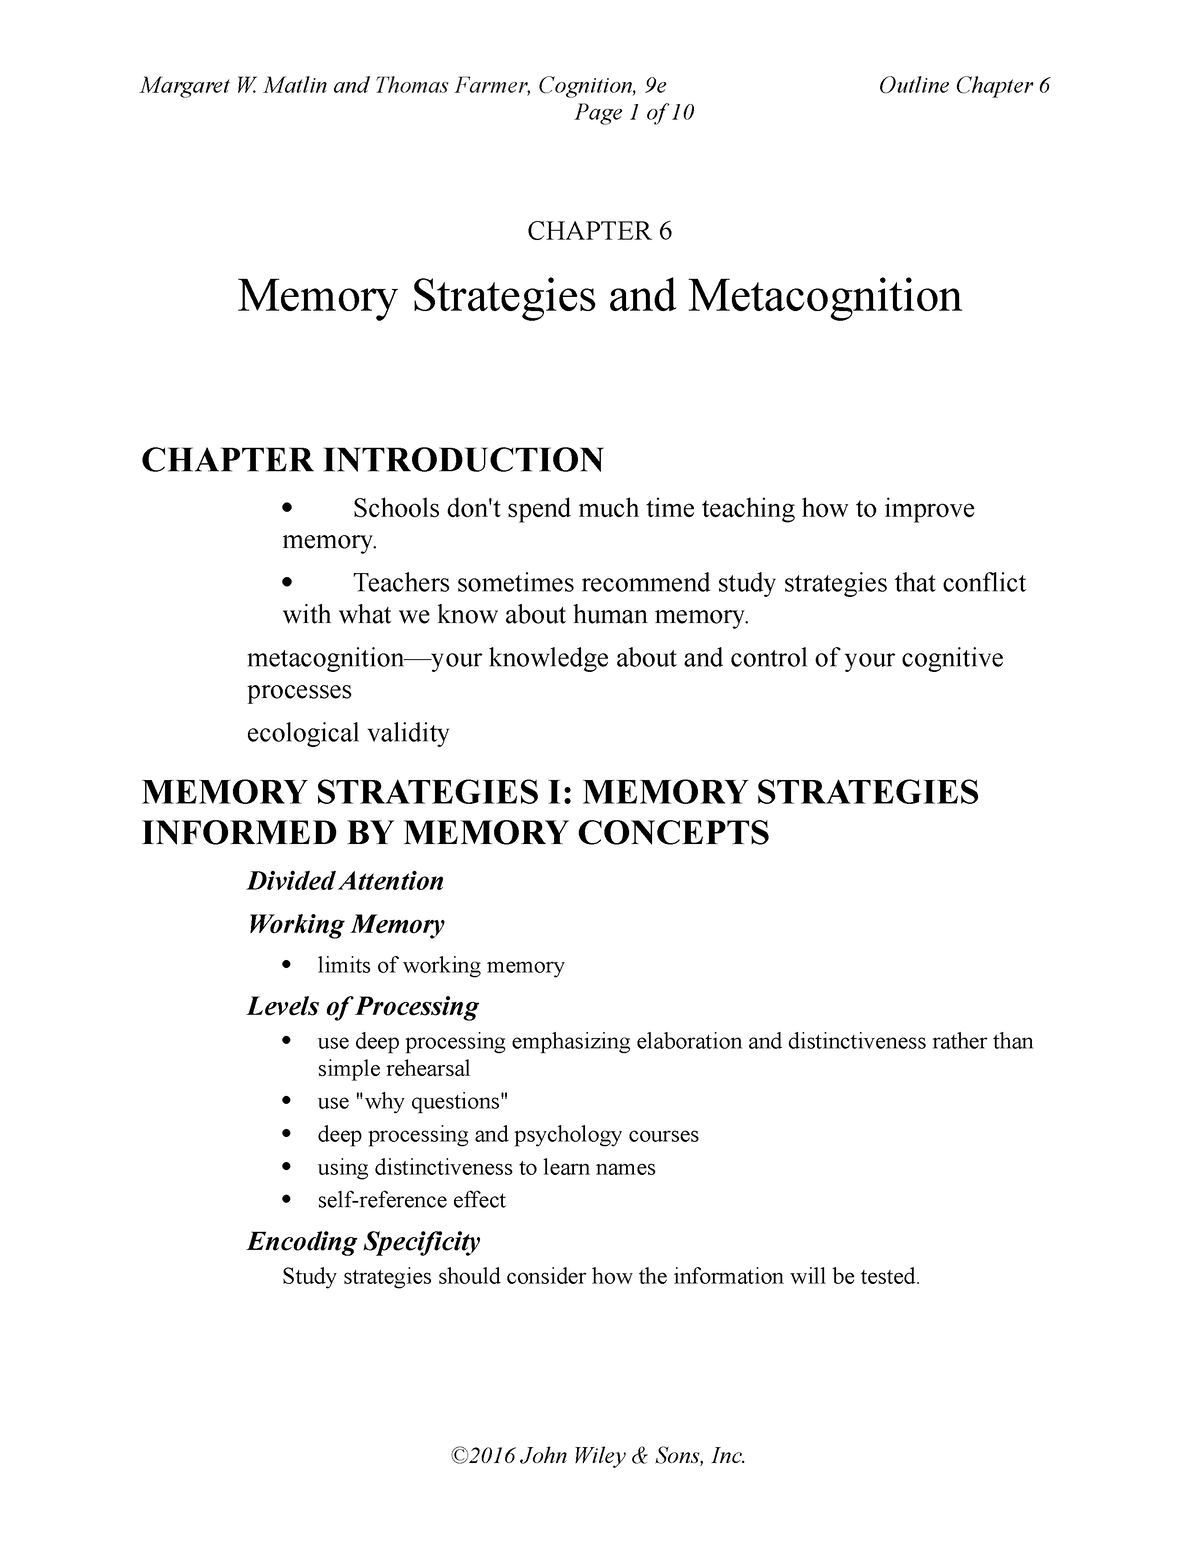 Ch06 - Cognitive Psychology - Page 1 of 10 CHAPTER 6 Memory Strategies ...